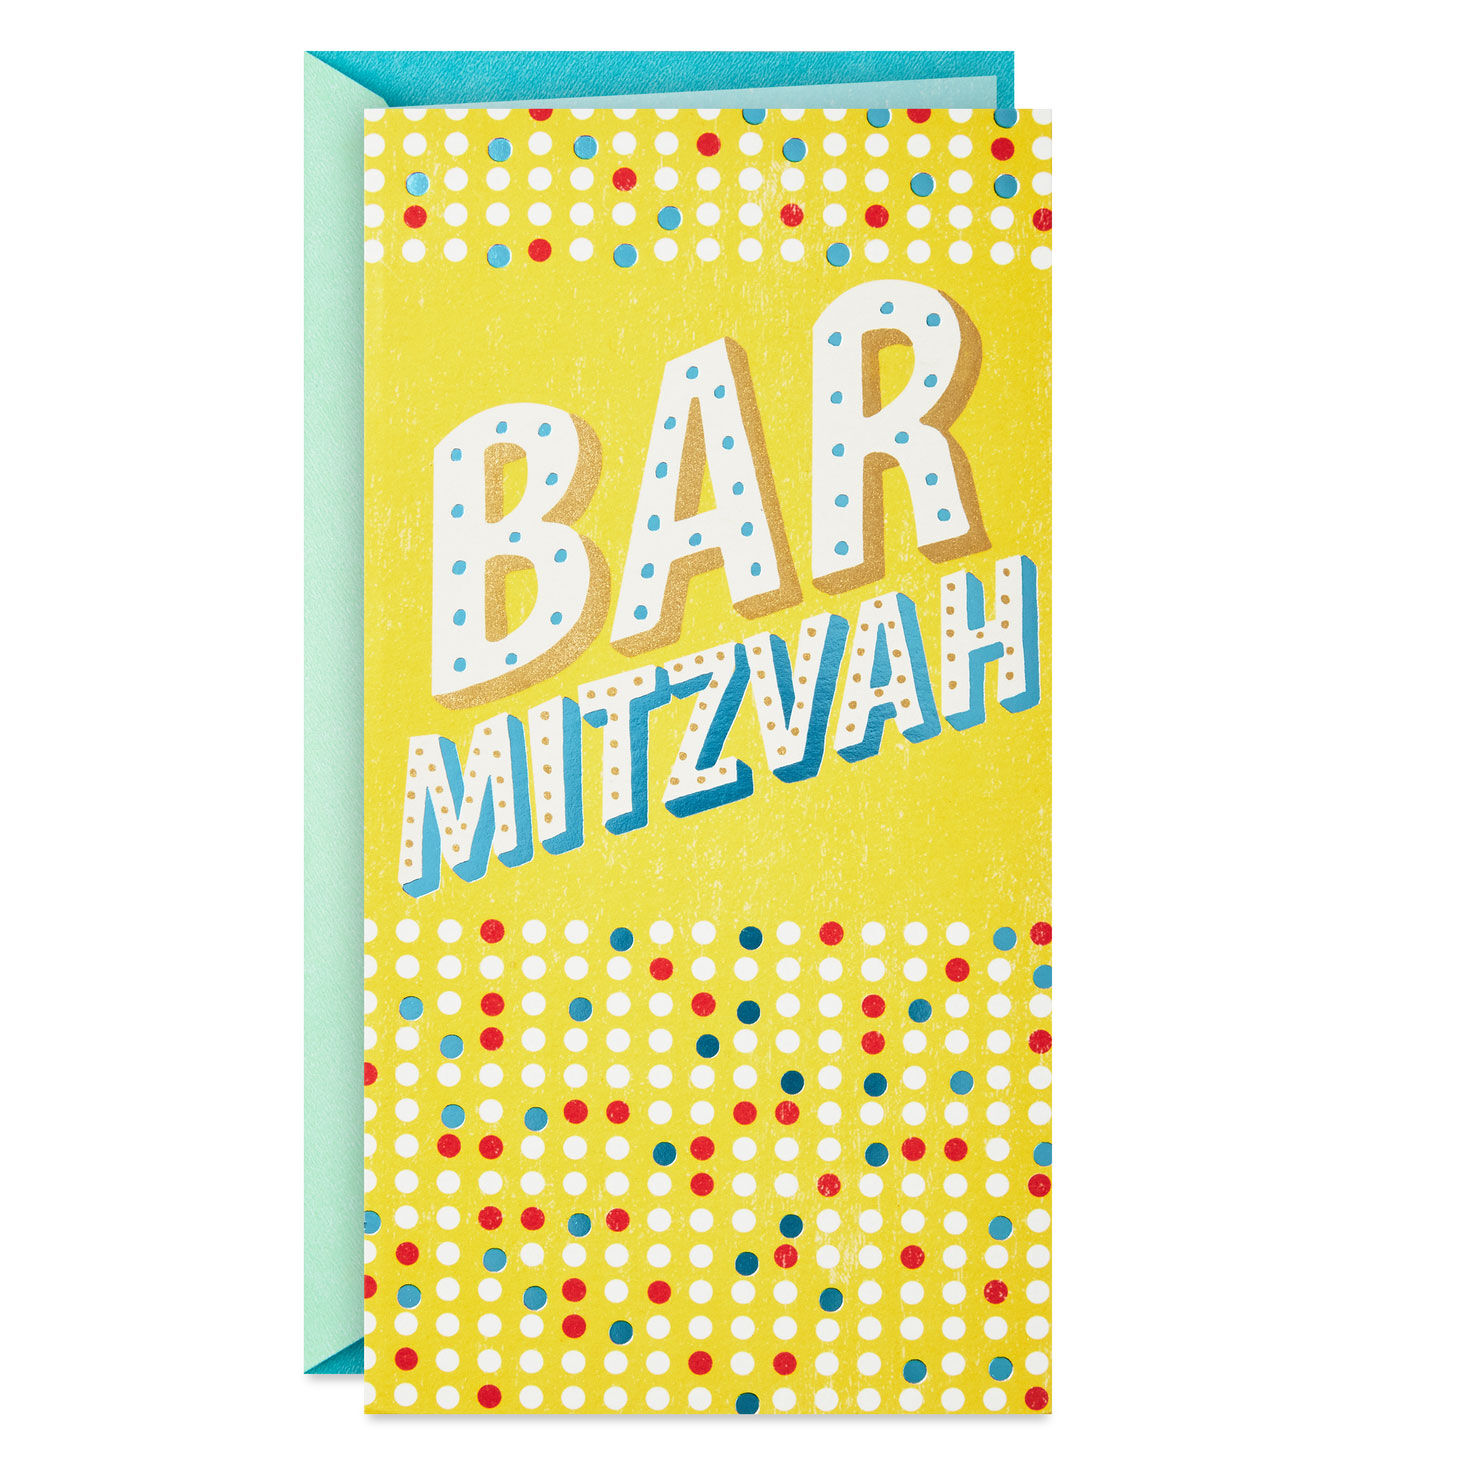 Nifty Gifty Card Holders Set of 8 Boy Party Money and Gift Card Sleeves Blue Bar Mitzvah